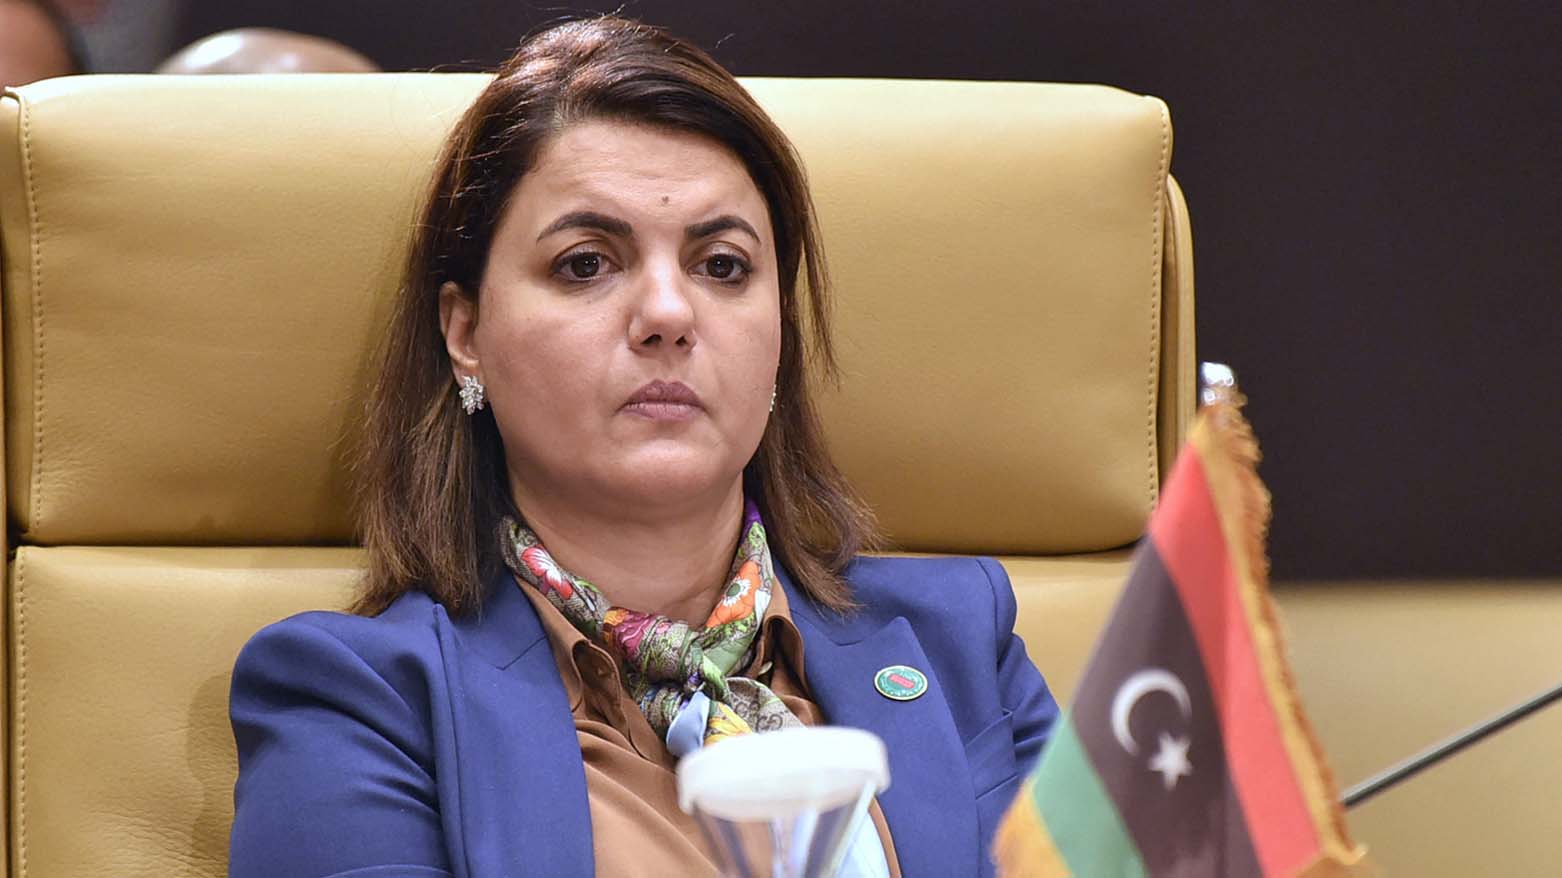 Libya's Foreign Minister Najla al-Mangoush attends a meeting in the Algerian capital Algiers, August 30, 2021. (Photo: Ryad Kramdi/AFP)